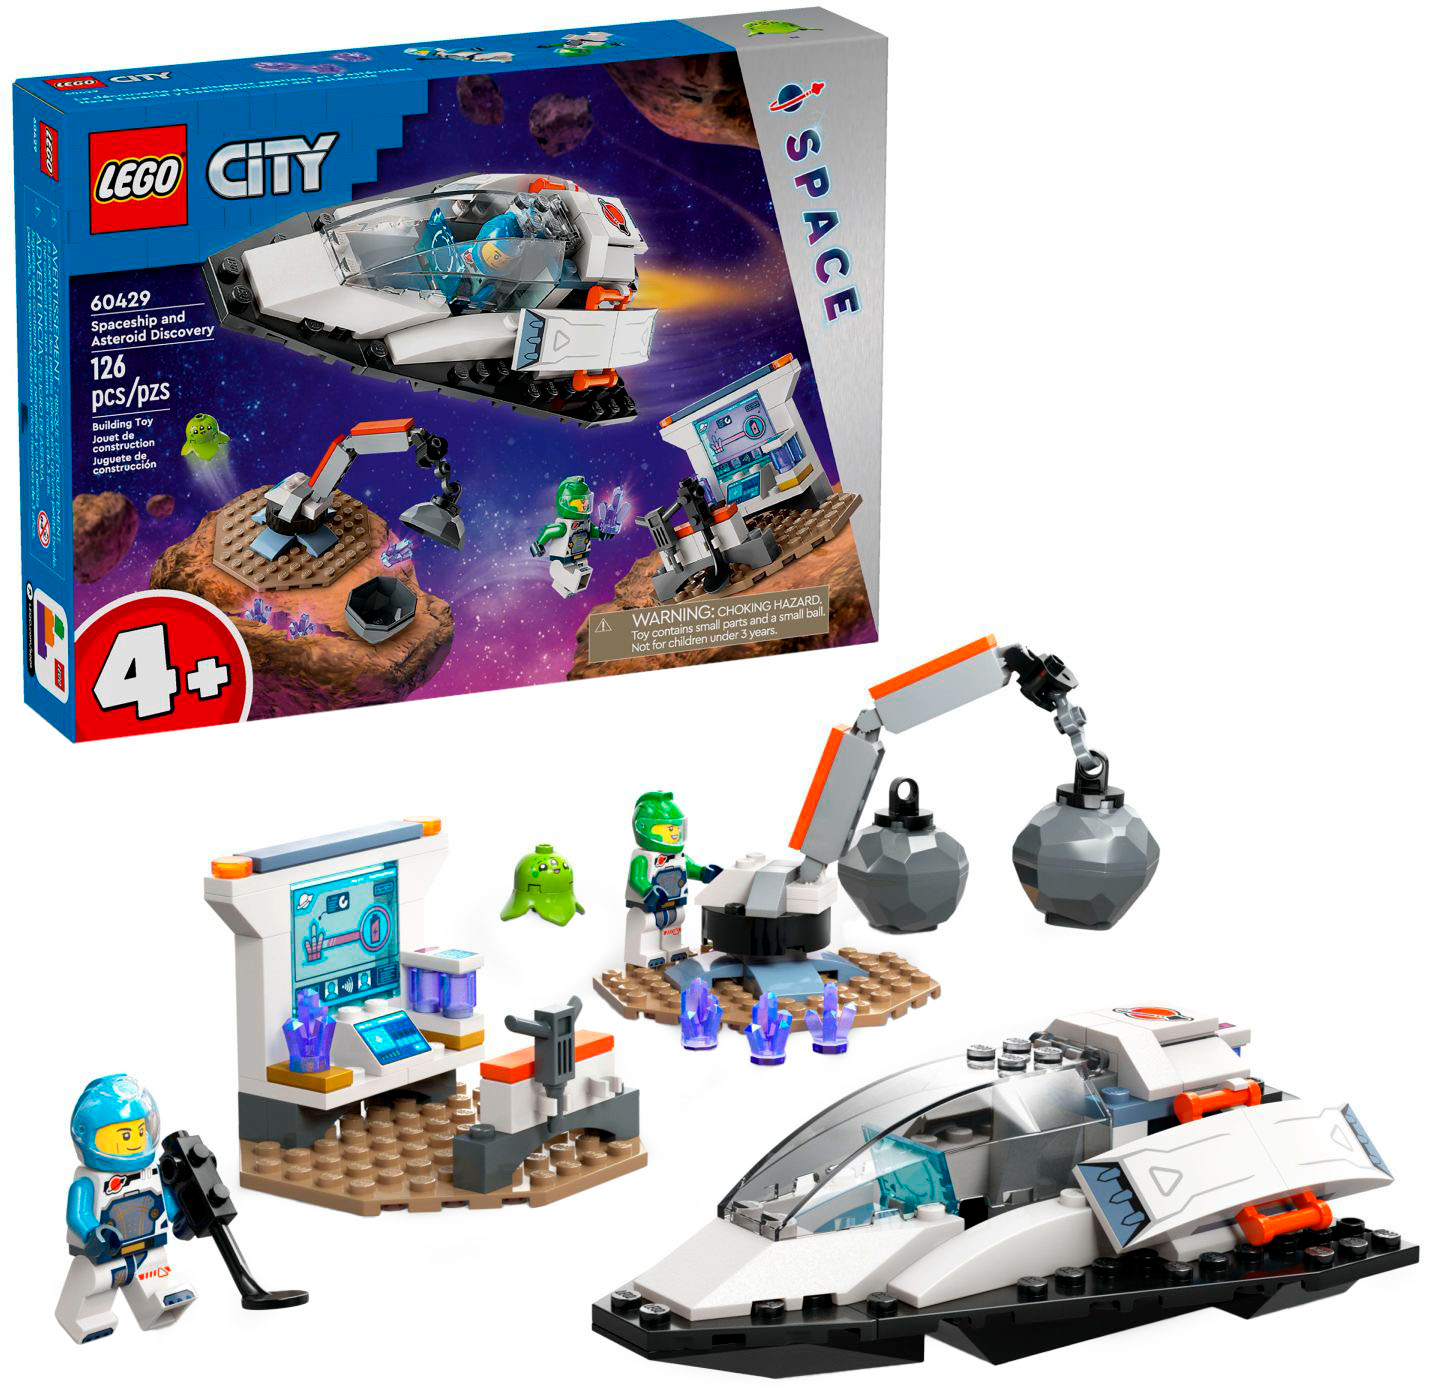 LEGO - City Spaceship and Asteroid Discovery Set 60429